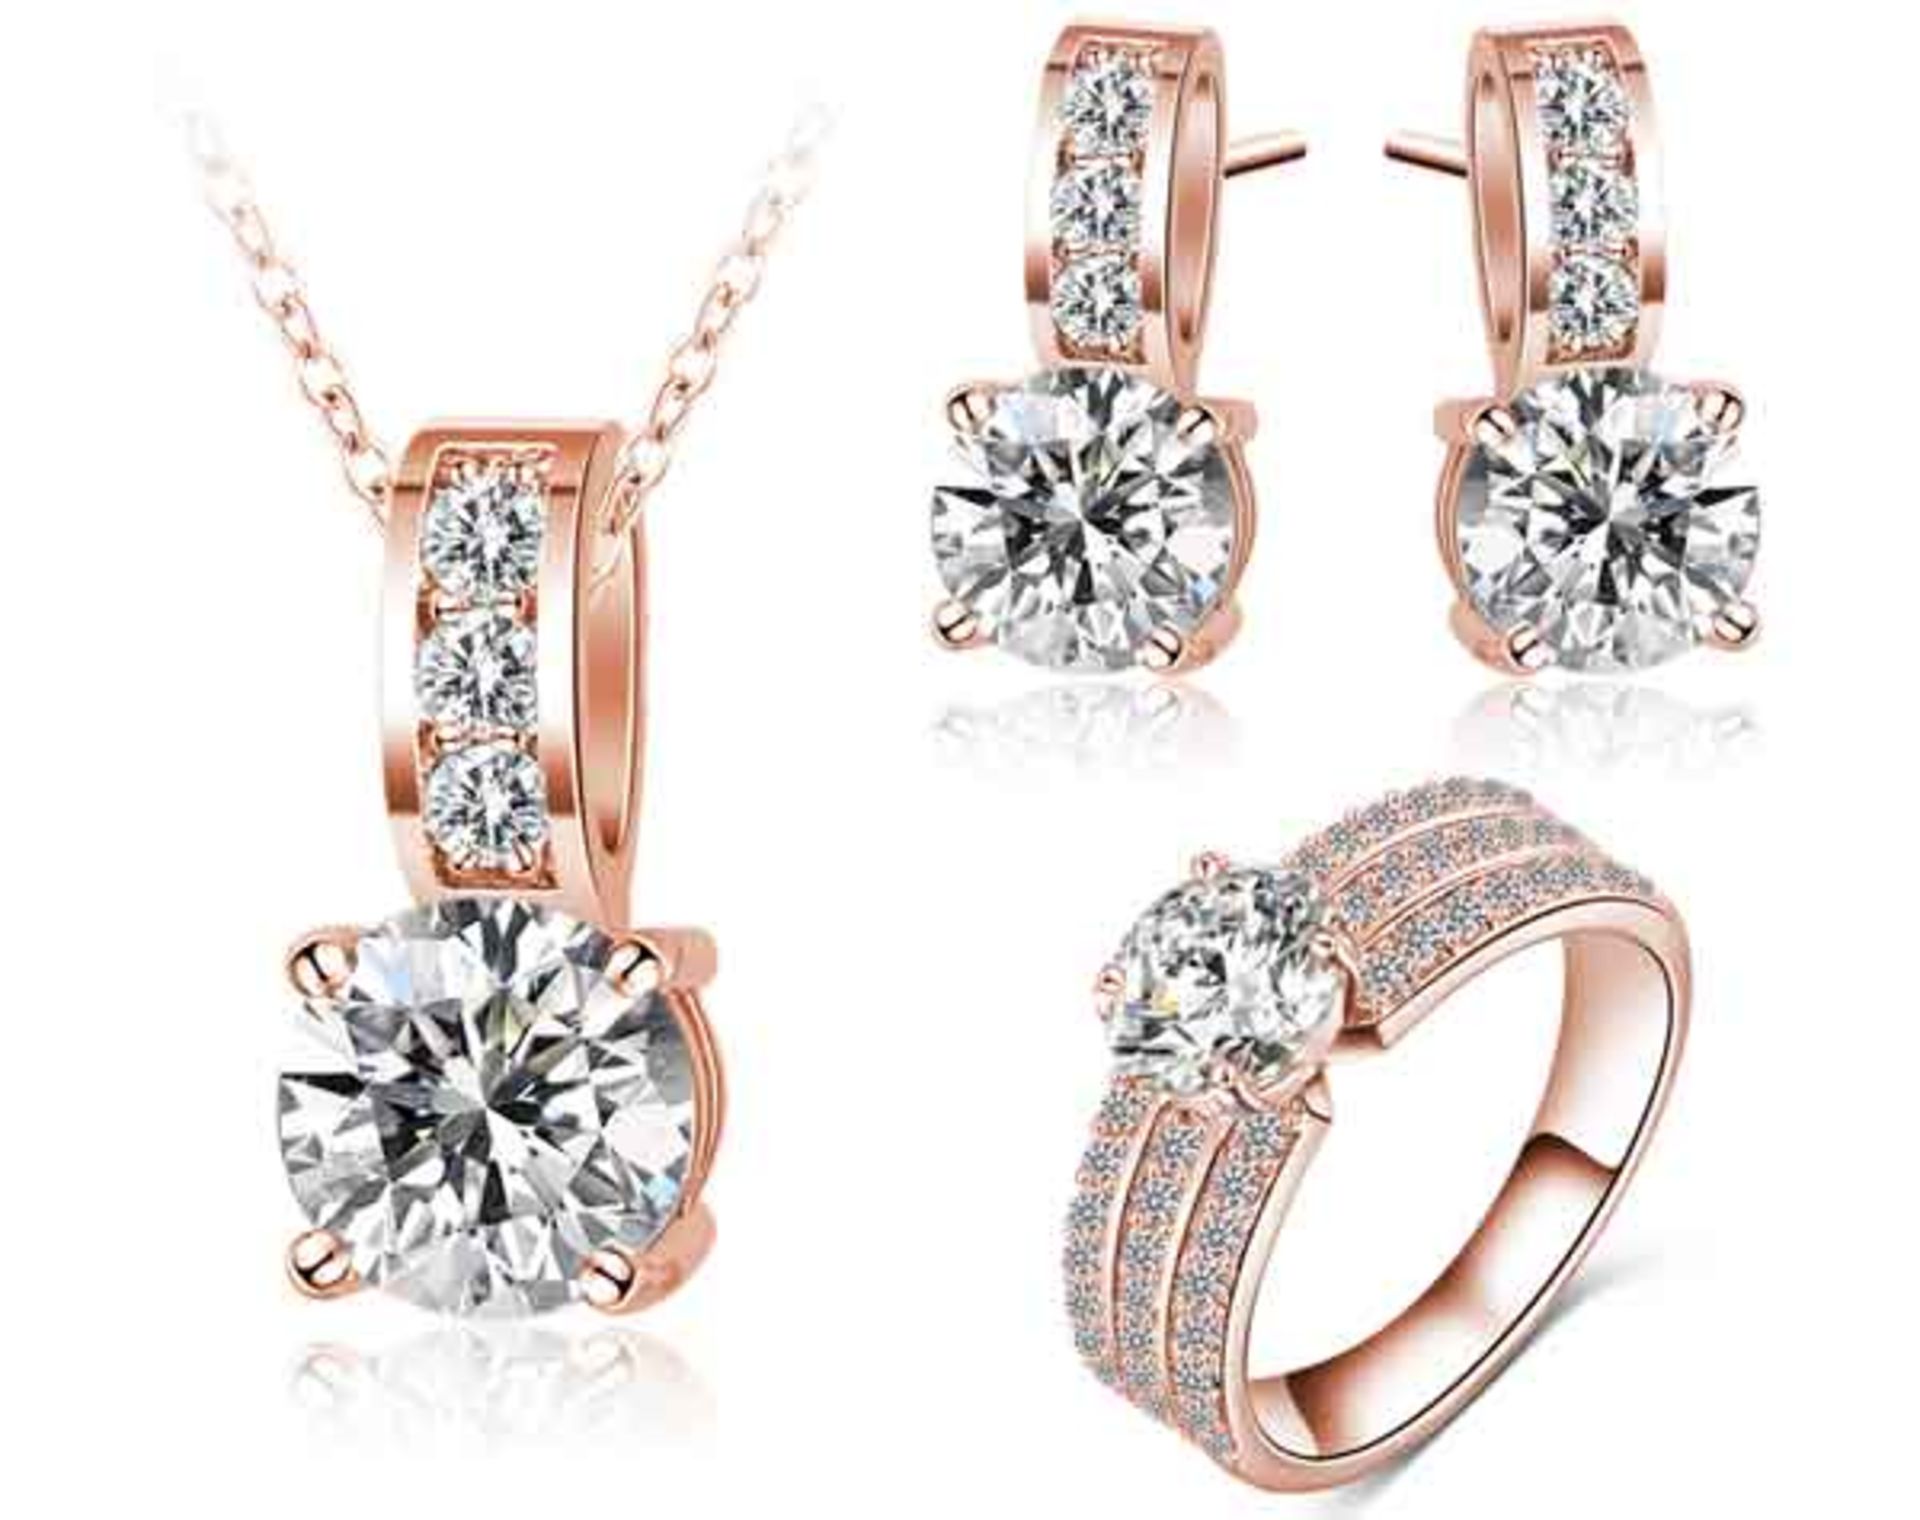 V Brand New Rose Colour CZ Stone Three Piece Necklace Earring and Ring Set X 2 YOUR BID PRICE TO